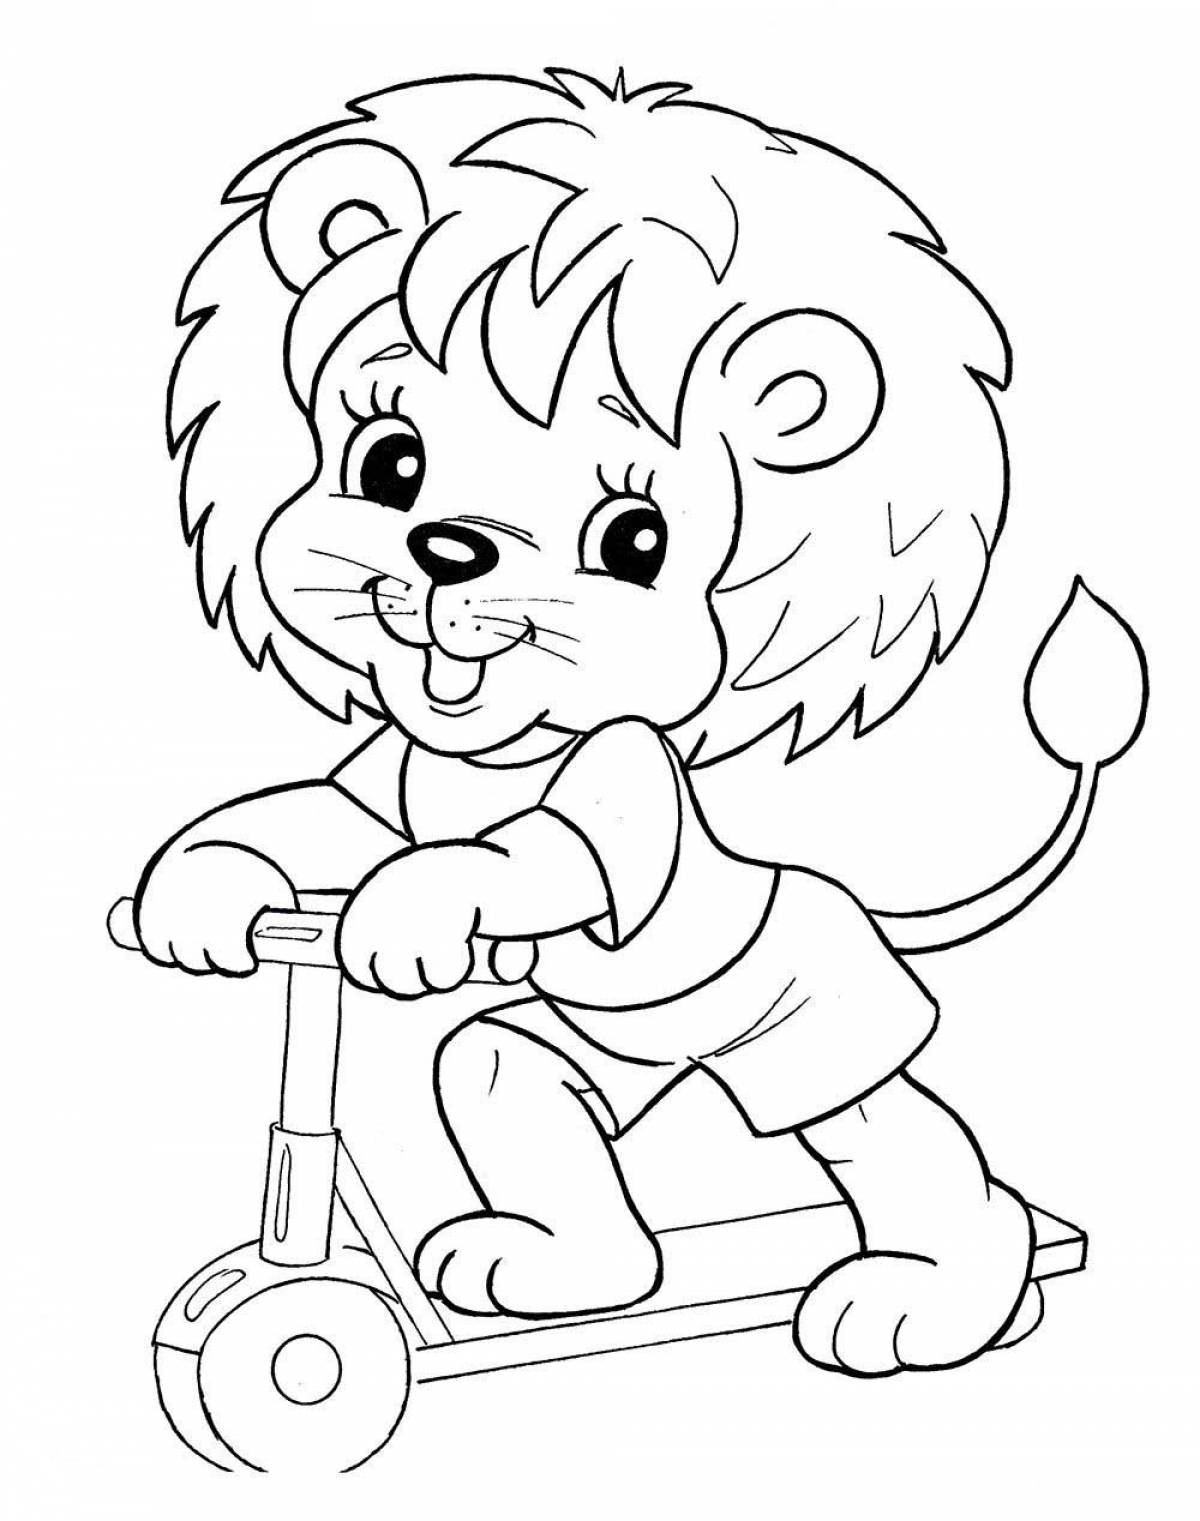 Lion on a scooter